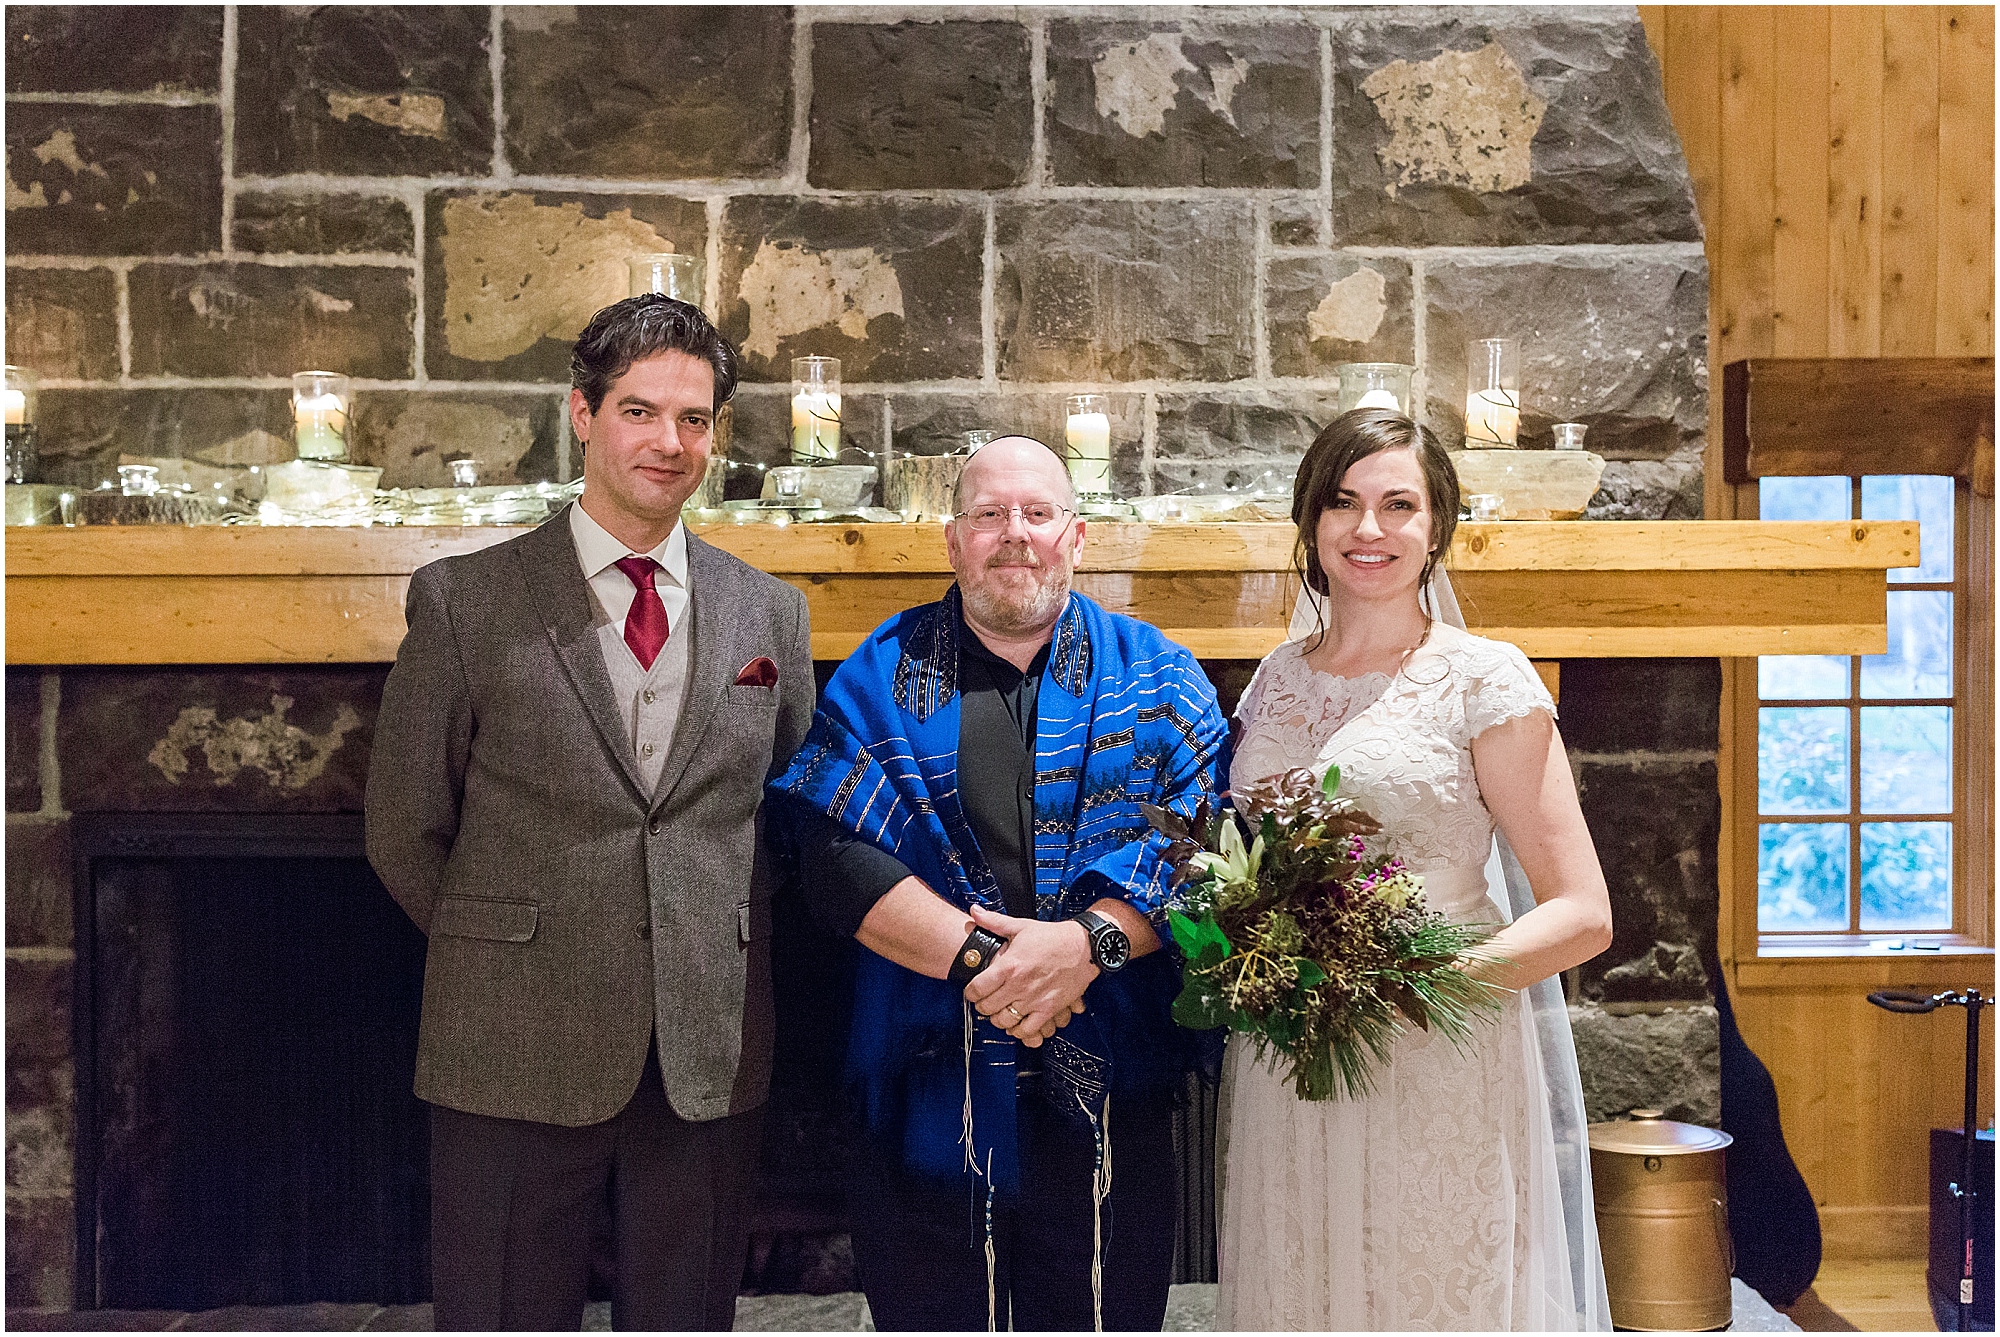 Rabbi Adam married this couple in an intimate ceremony in the Fireside Room at their Sunriver Resort winter wedding in Oregon. | Erica Swantek Photography